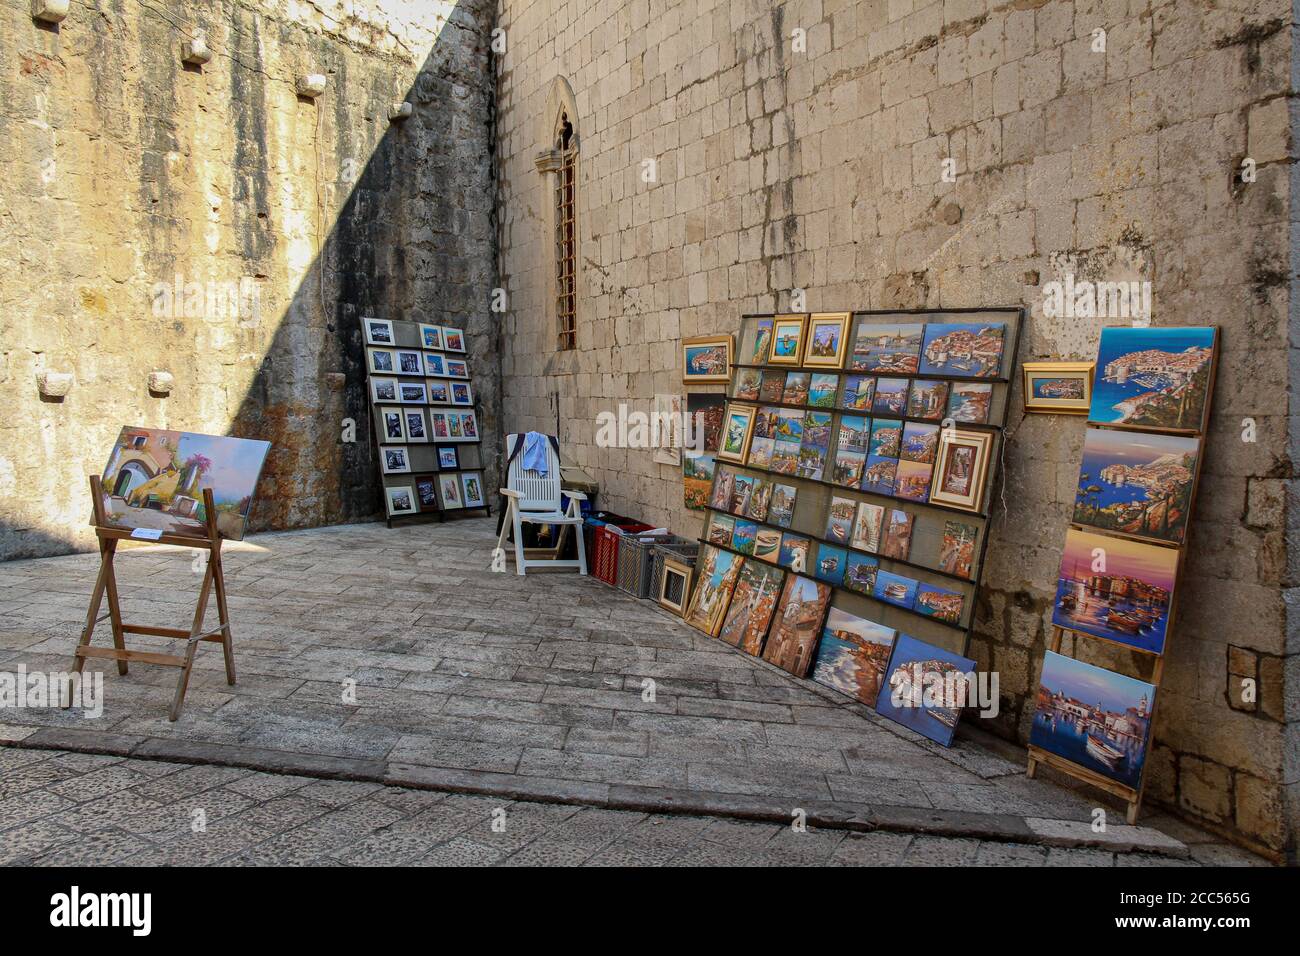 Dubrovnik, Croatia - July 15th 2018: An artists stall in Dubrovnik's old town in a late summers afternoon, Croatia Stock Photo